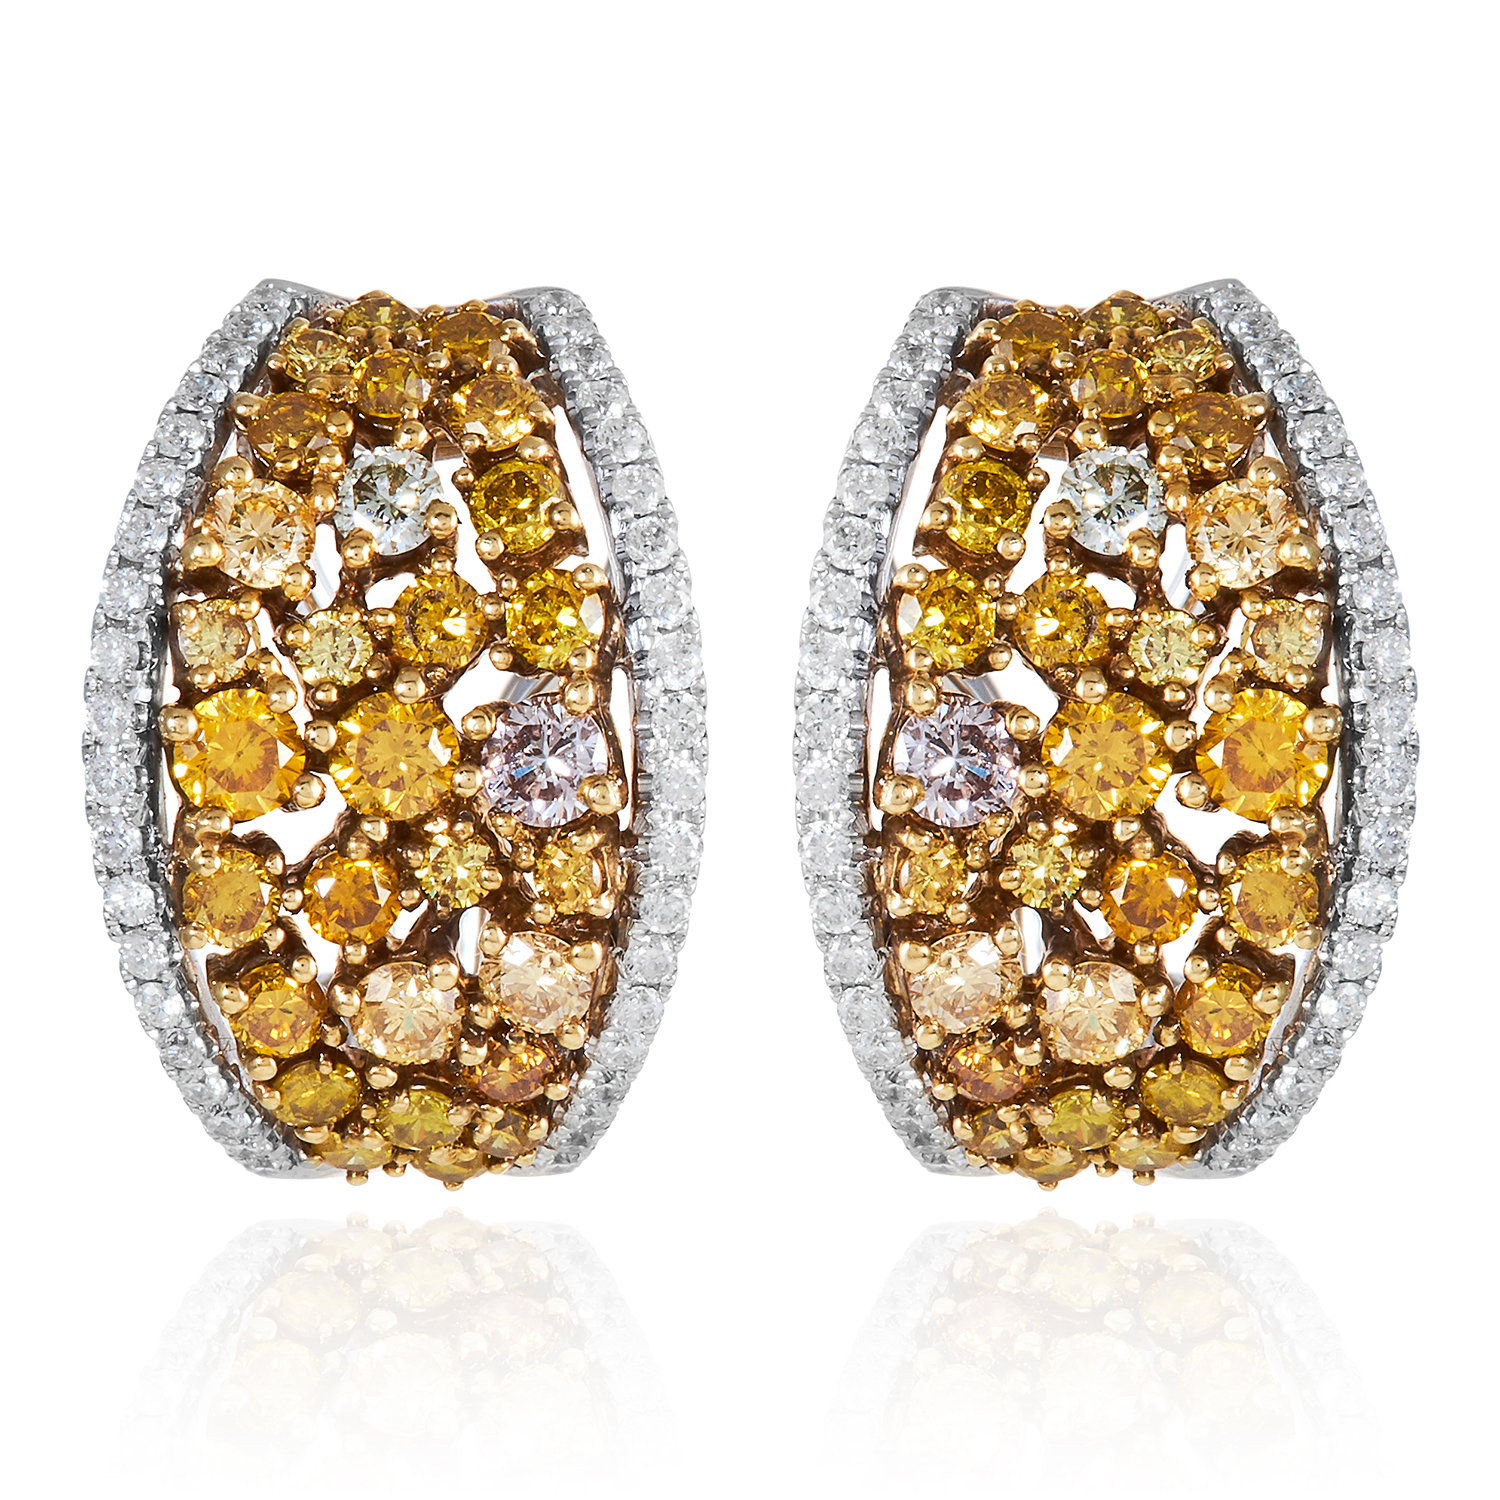 A PAIR OF YELLOW AND WHITE DIAMOND EARRINGS in 18ct white gold, jewelled with round cut yellow and